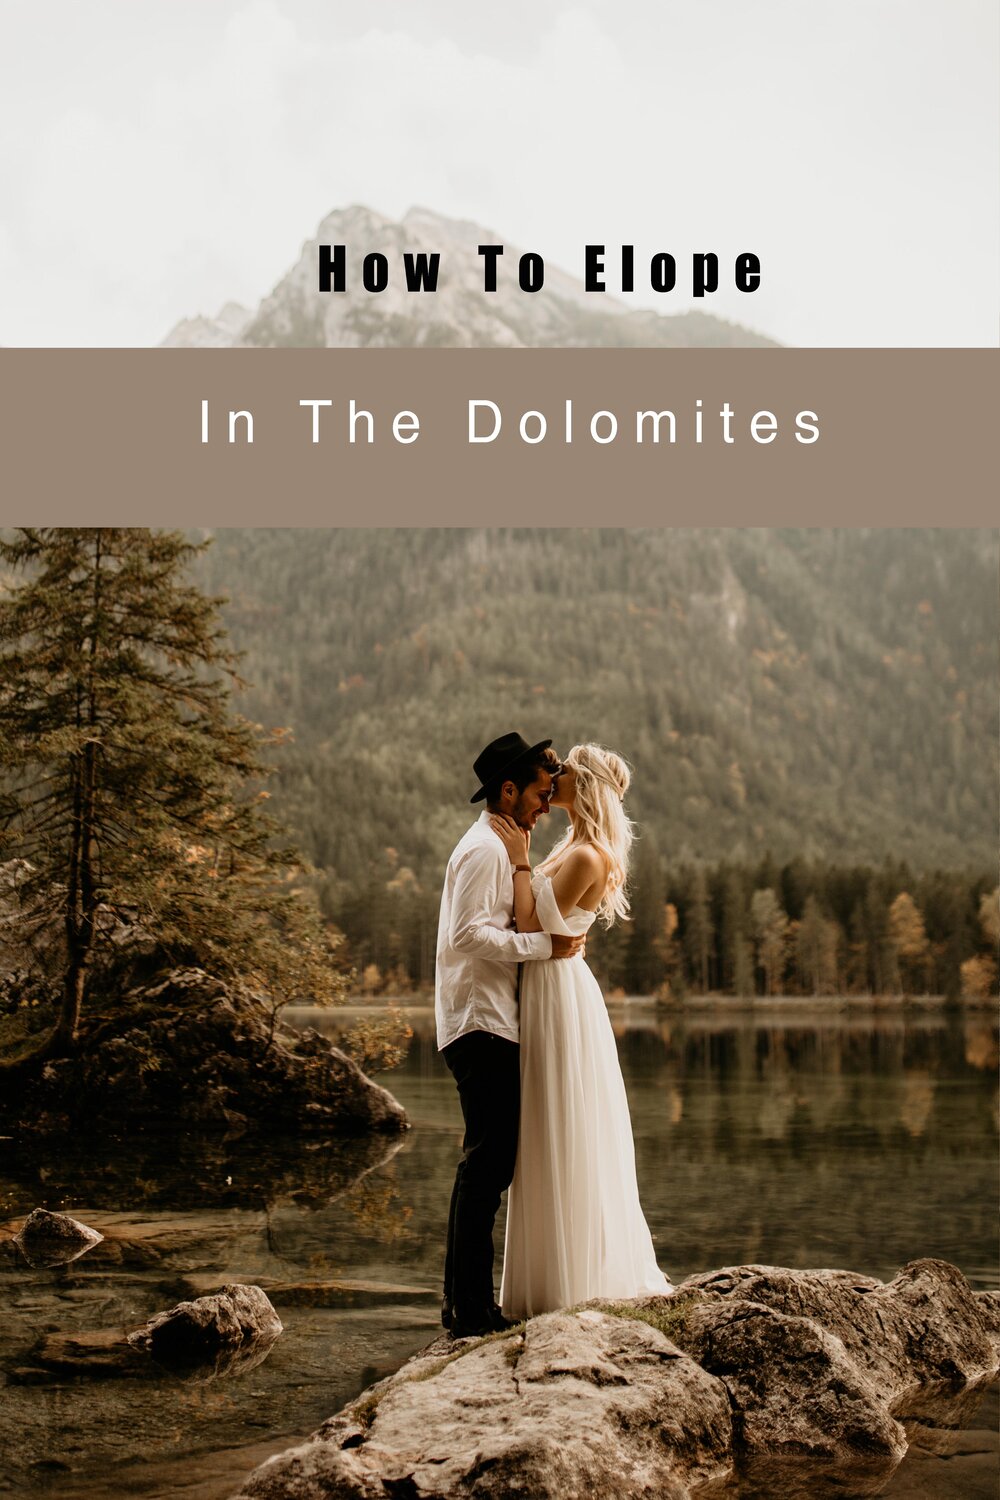 The Best Guide for Eloping in The Dolomites